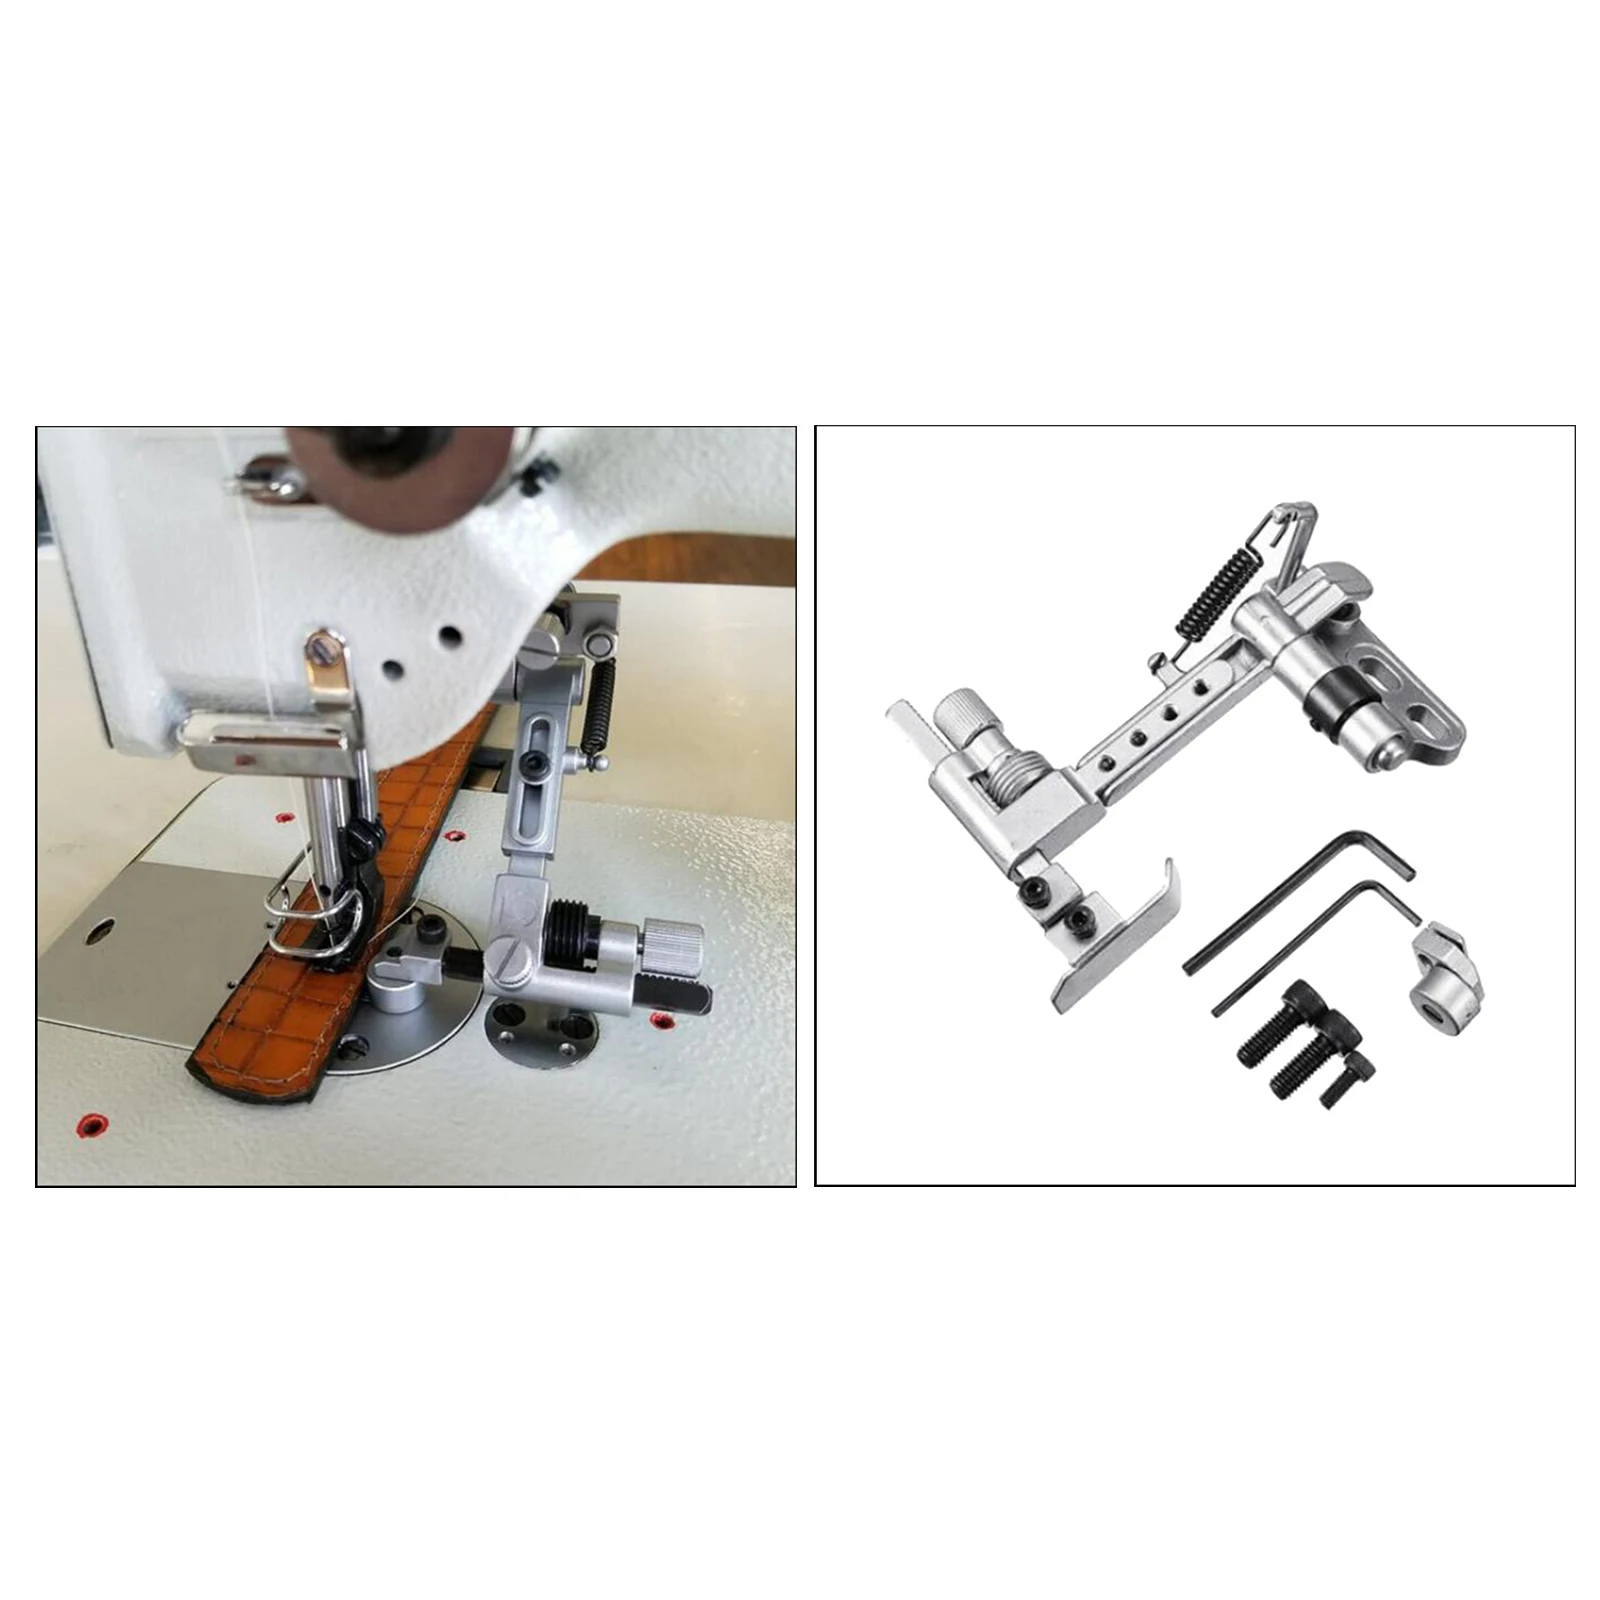 Suspended Edge Guide Kit for Pfaff Industrial Sewing Machines 